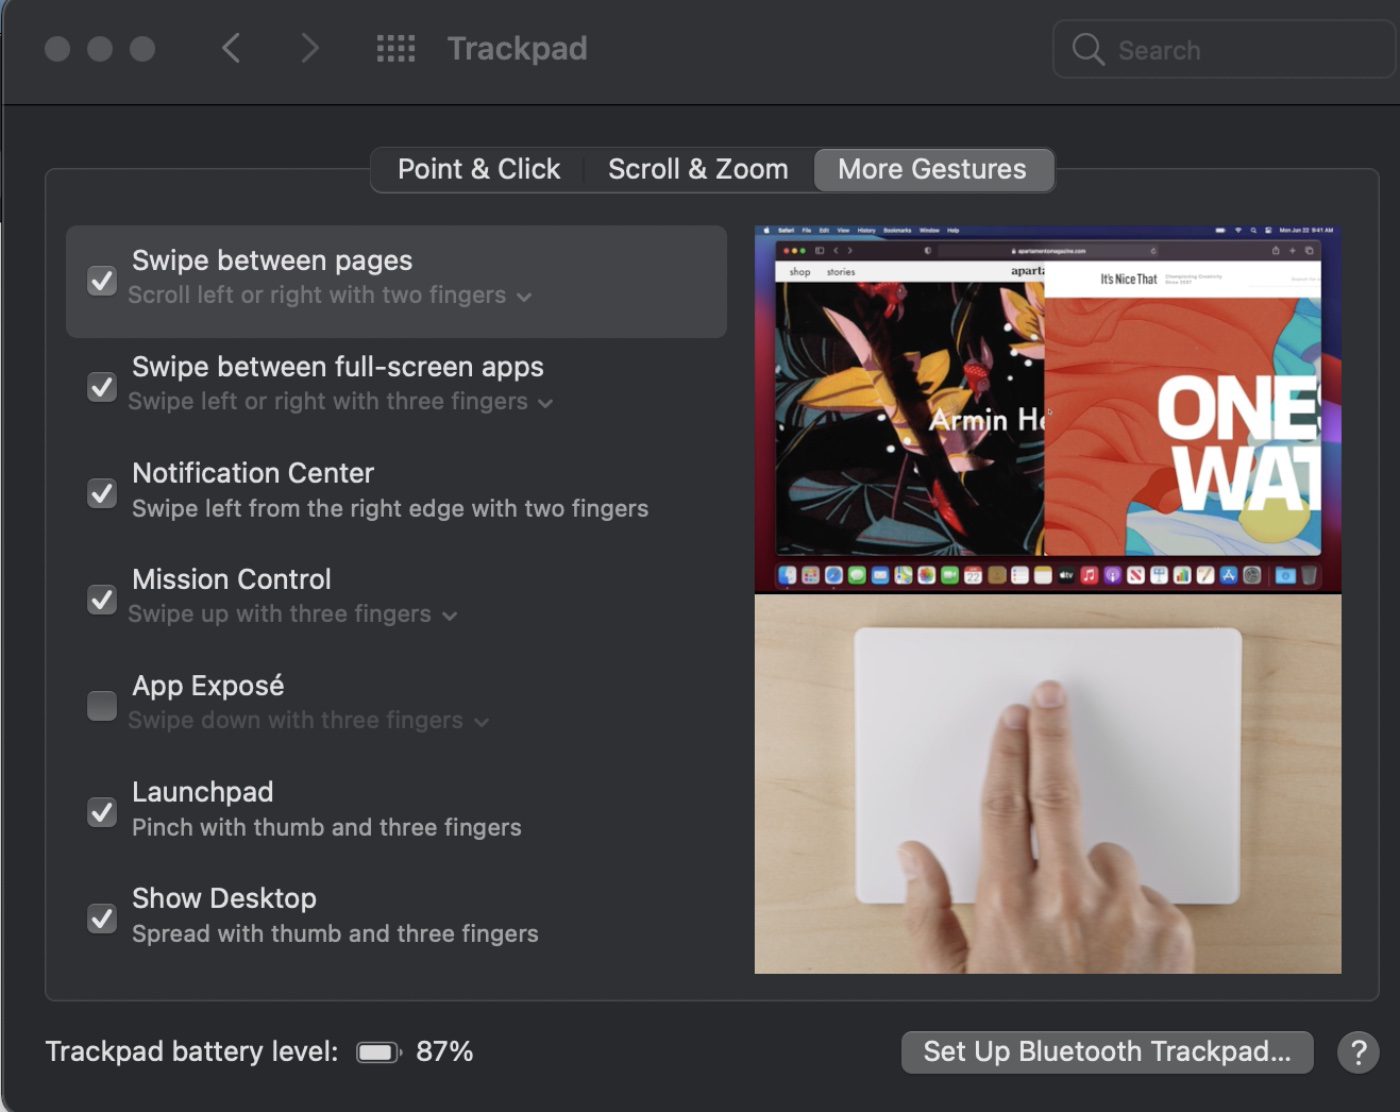 Trackpad More Gesture preferences